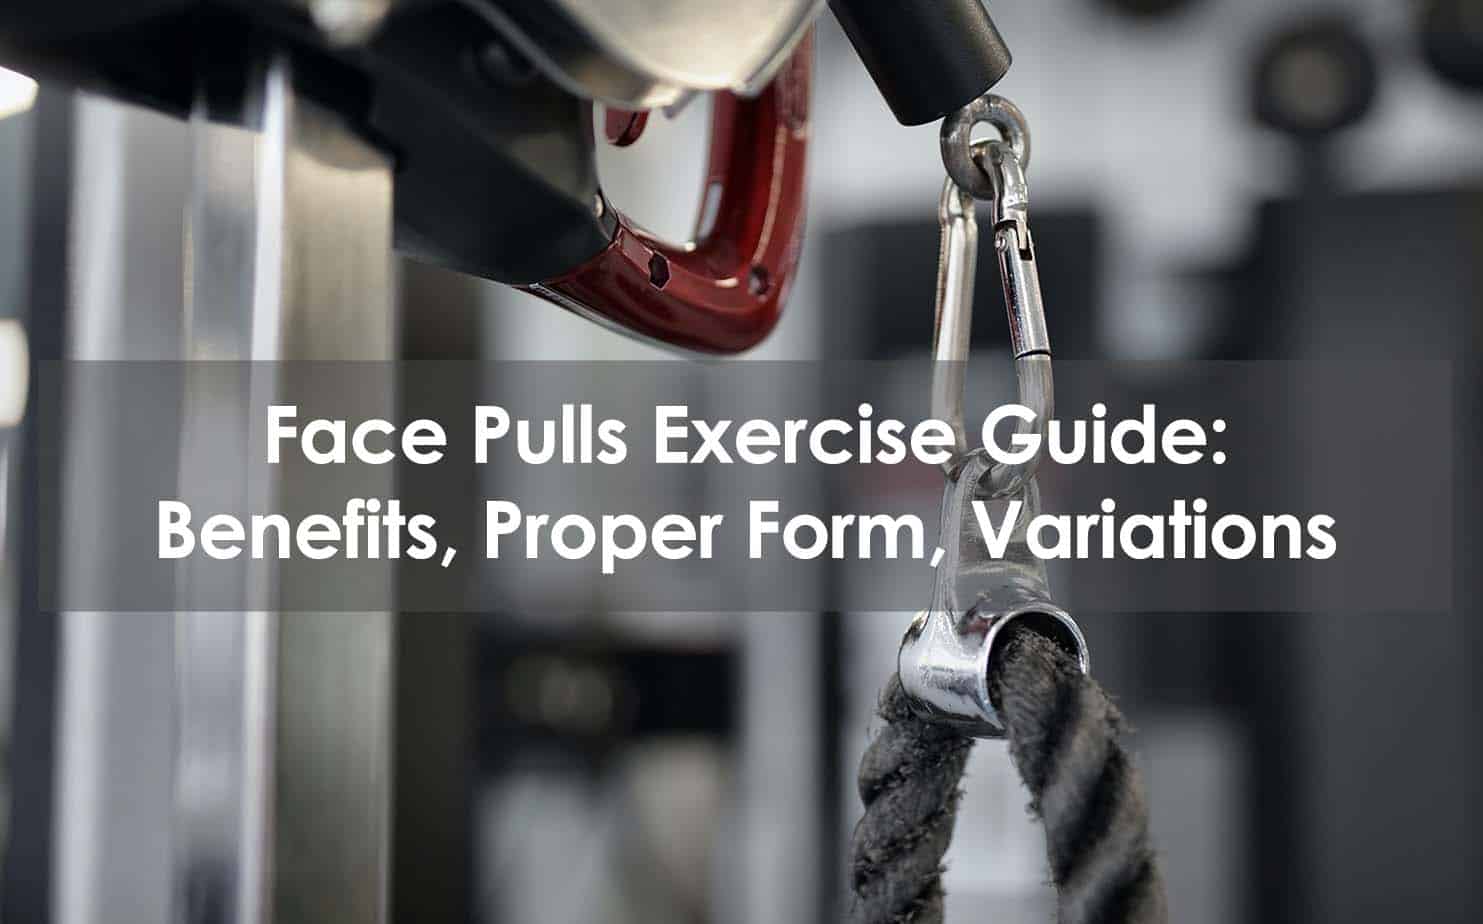 Face Pulls Exercise Guide: Benefits, Proper Form, Variations